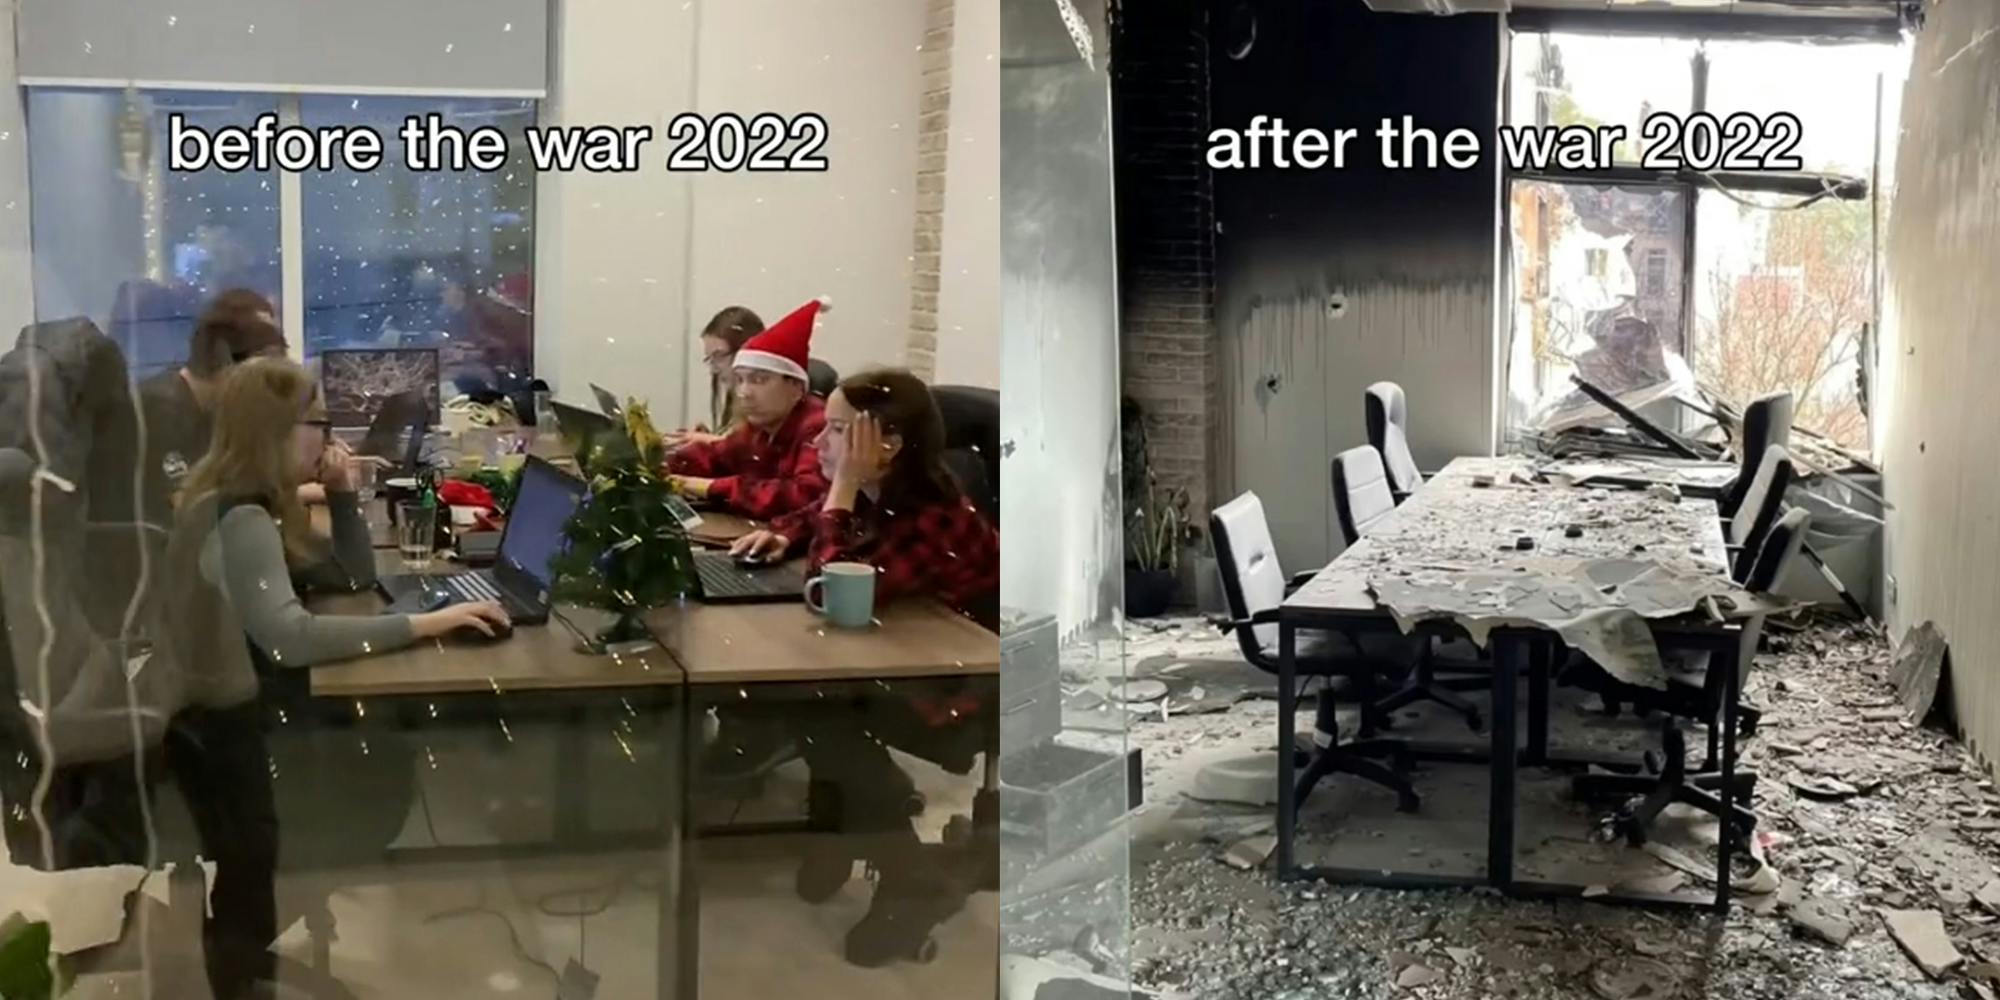 office workers at tables with caption "before the war 2022" (l) same room after bombing with caption "after the war 2022" (r)